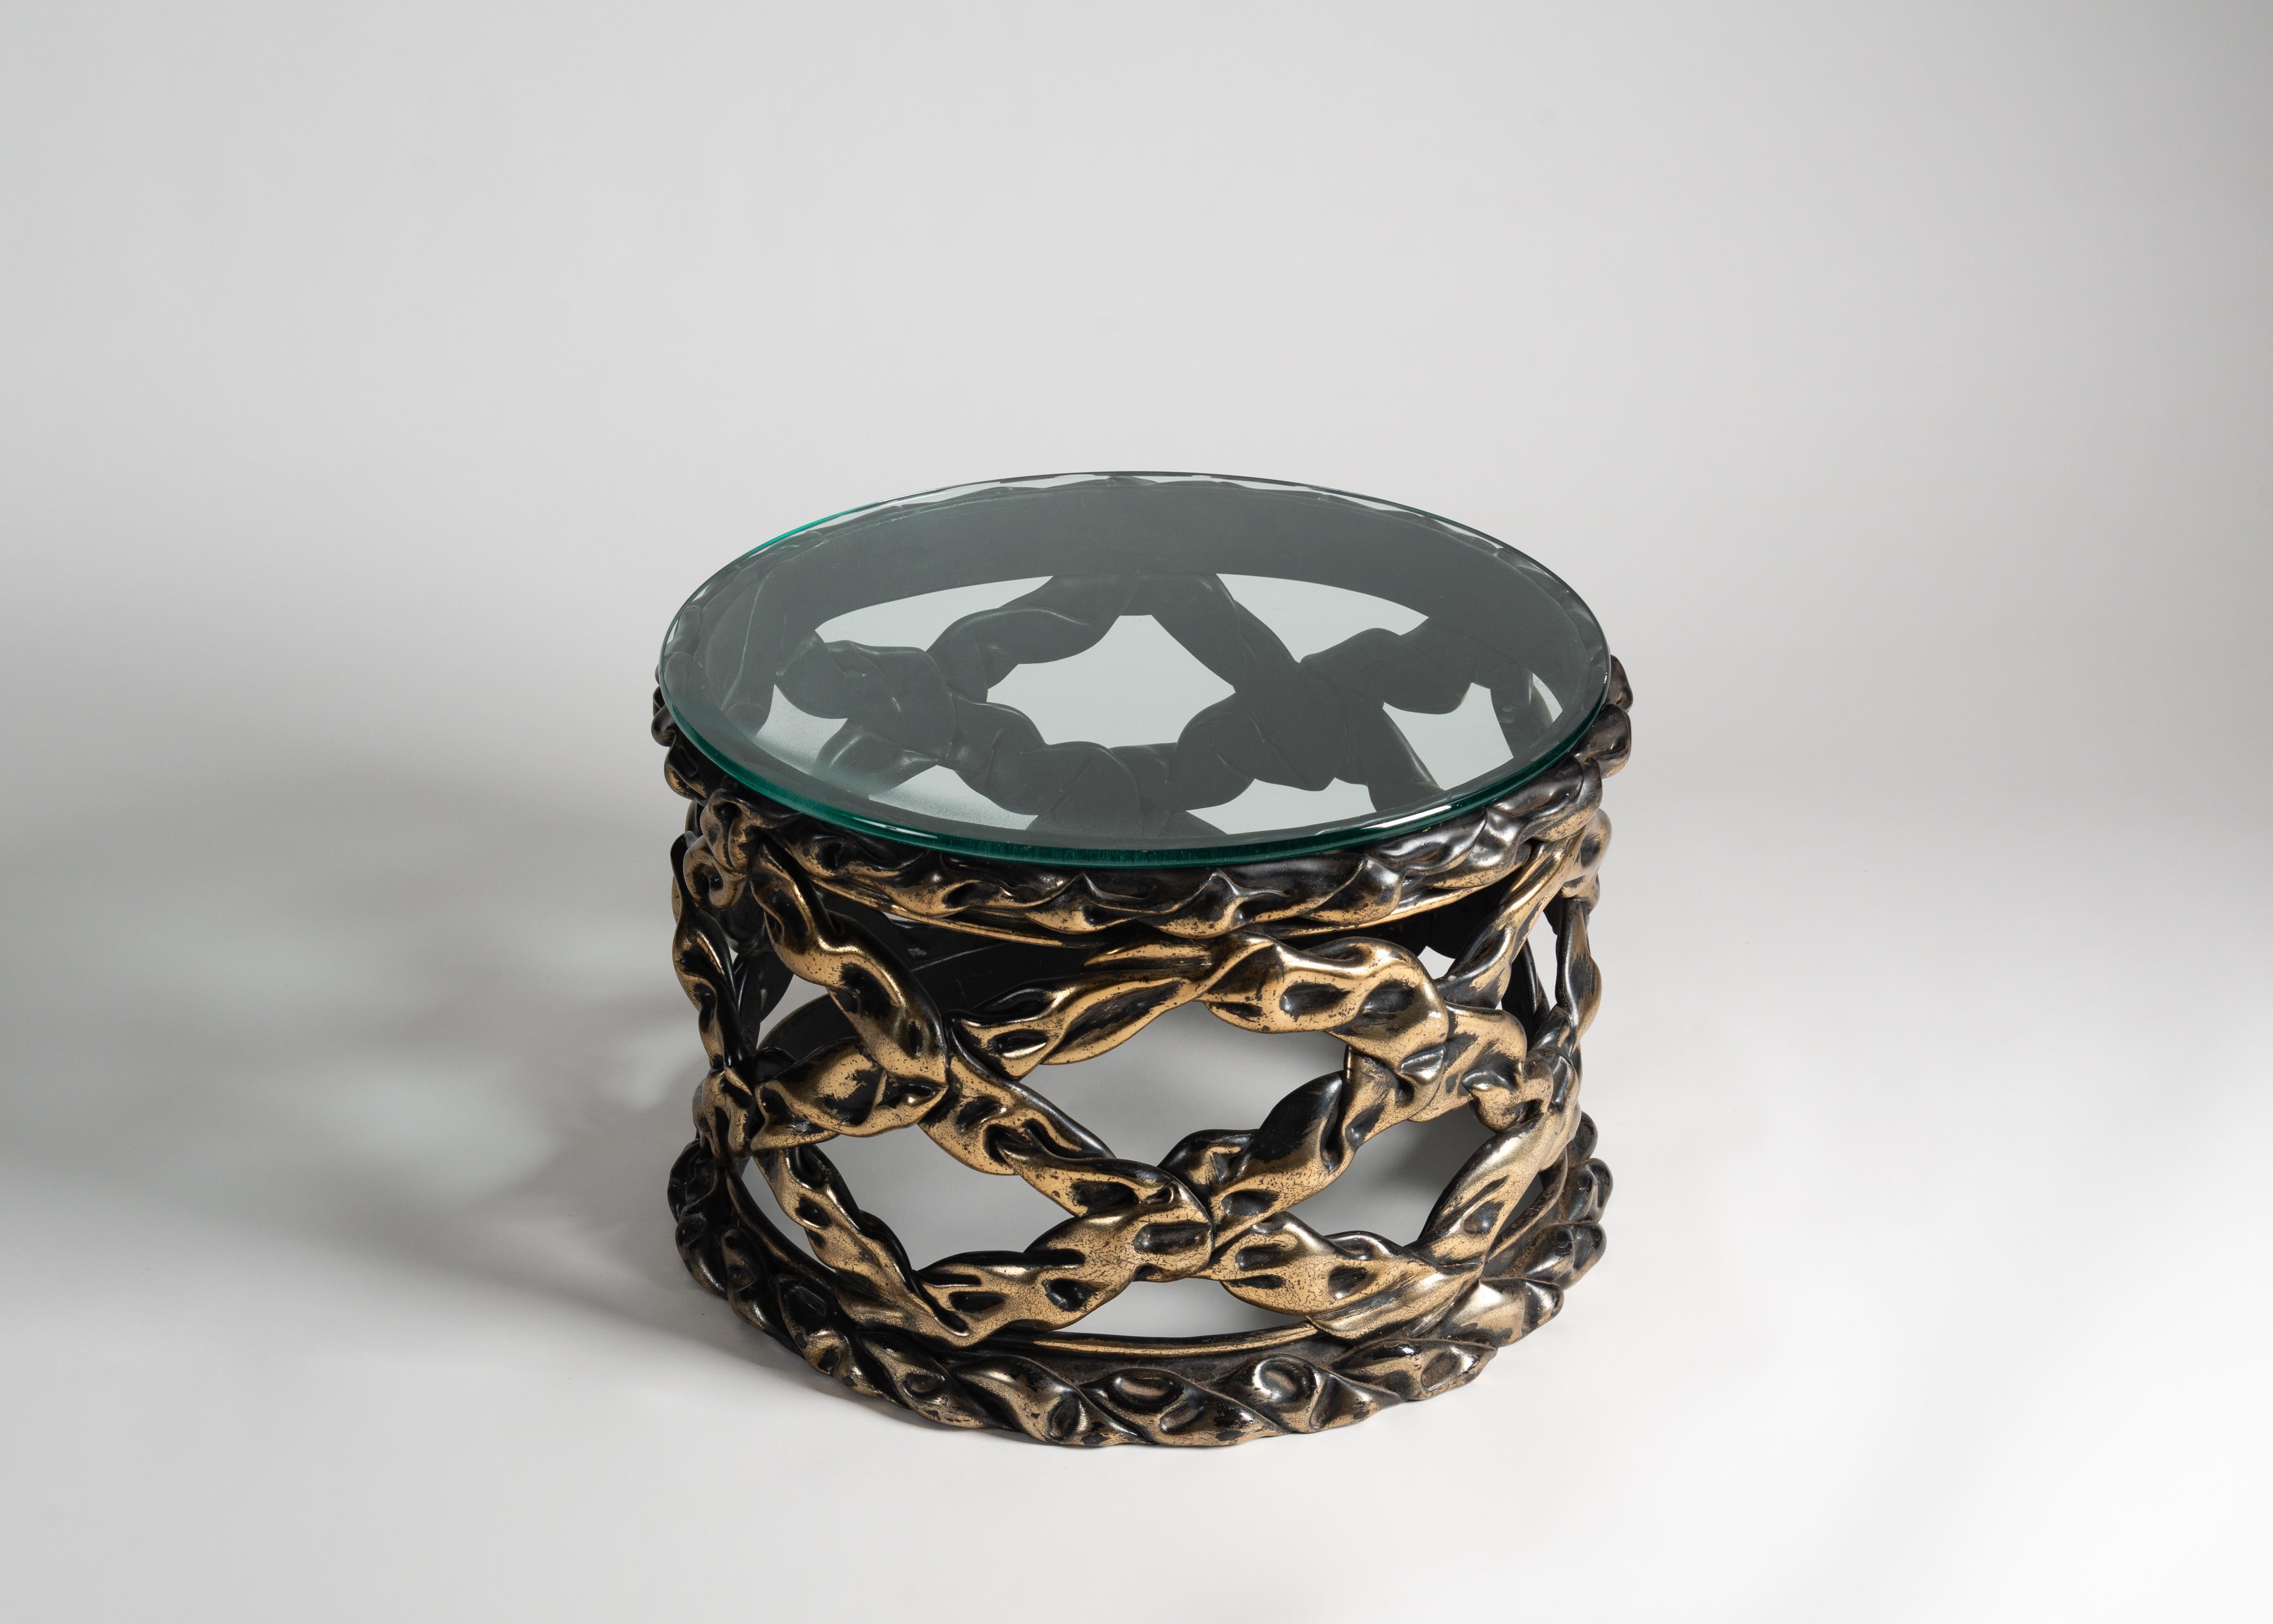 With a top of glass and a base of bronze-colored resin modeled into a cylinder of latticed ribbons, this table, in the style of Tony Duquette, possesses a unique dark beauty.

